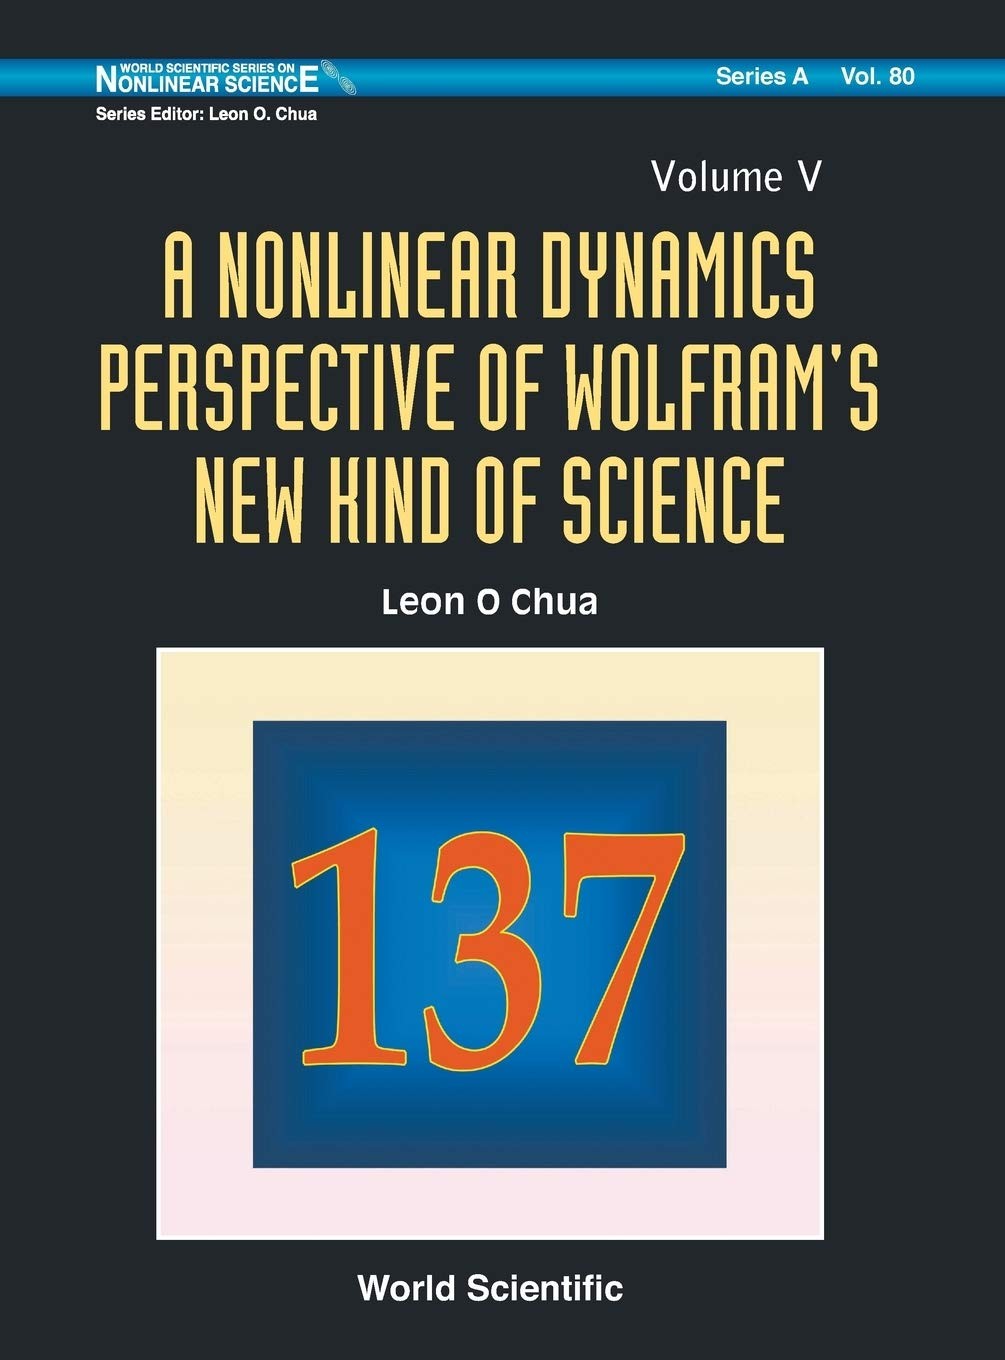 A Nonlinear Dynamics Perspective of Wolfram's New Kind of Science - Volume 5